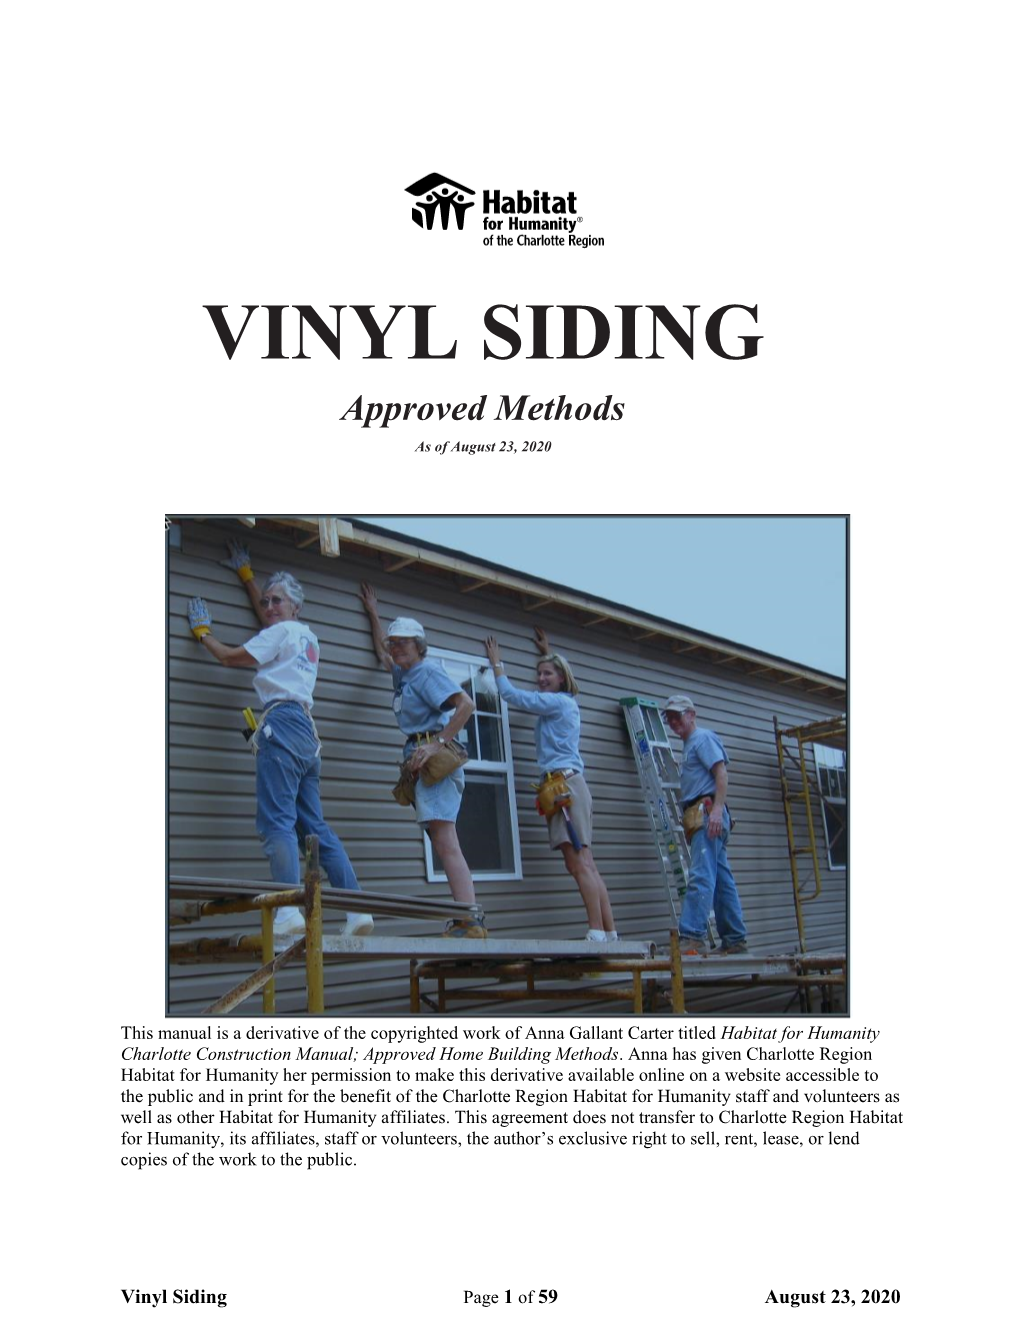 VINYL SIDING Approved Methods As of August 23, 2020